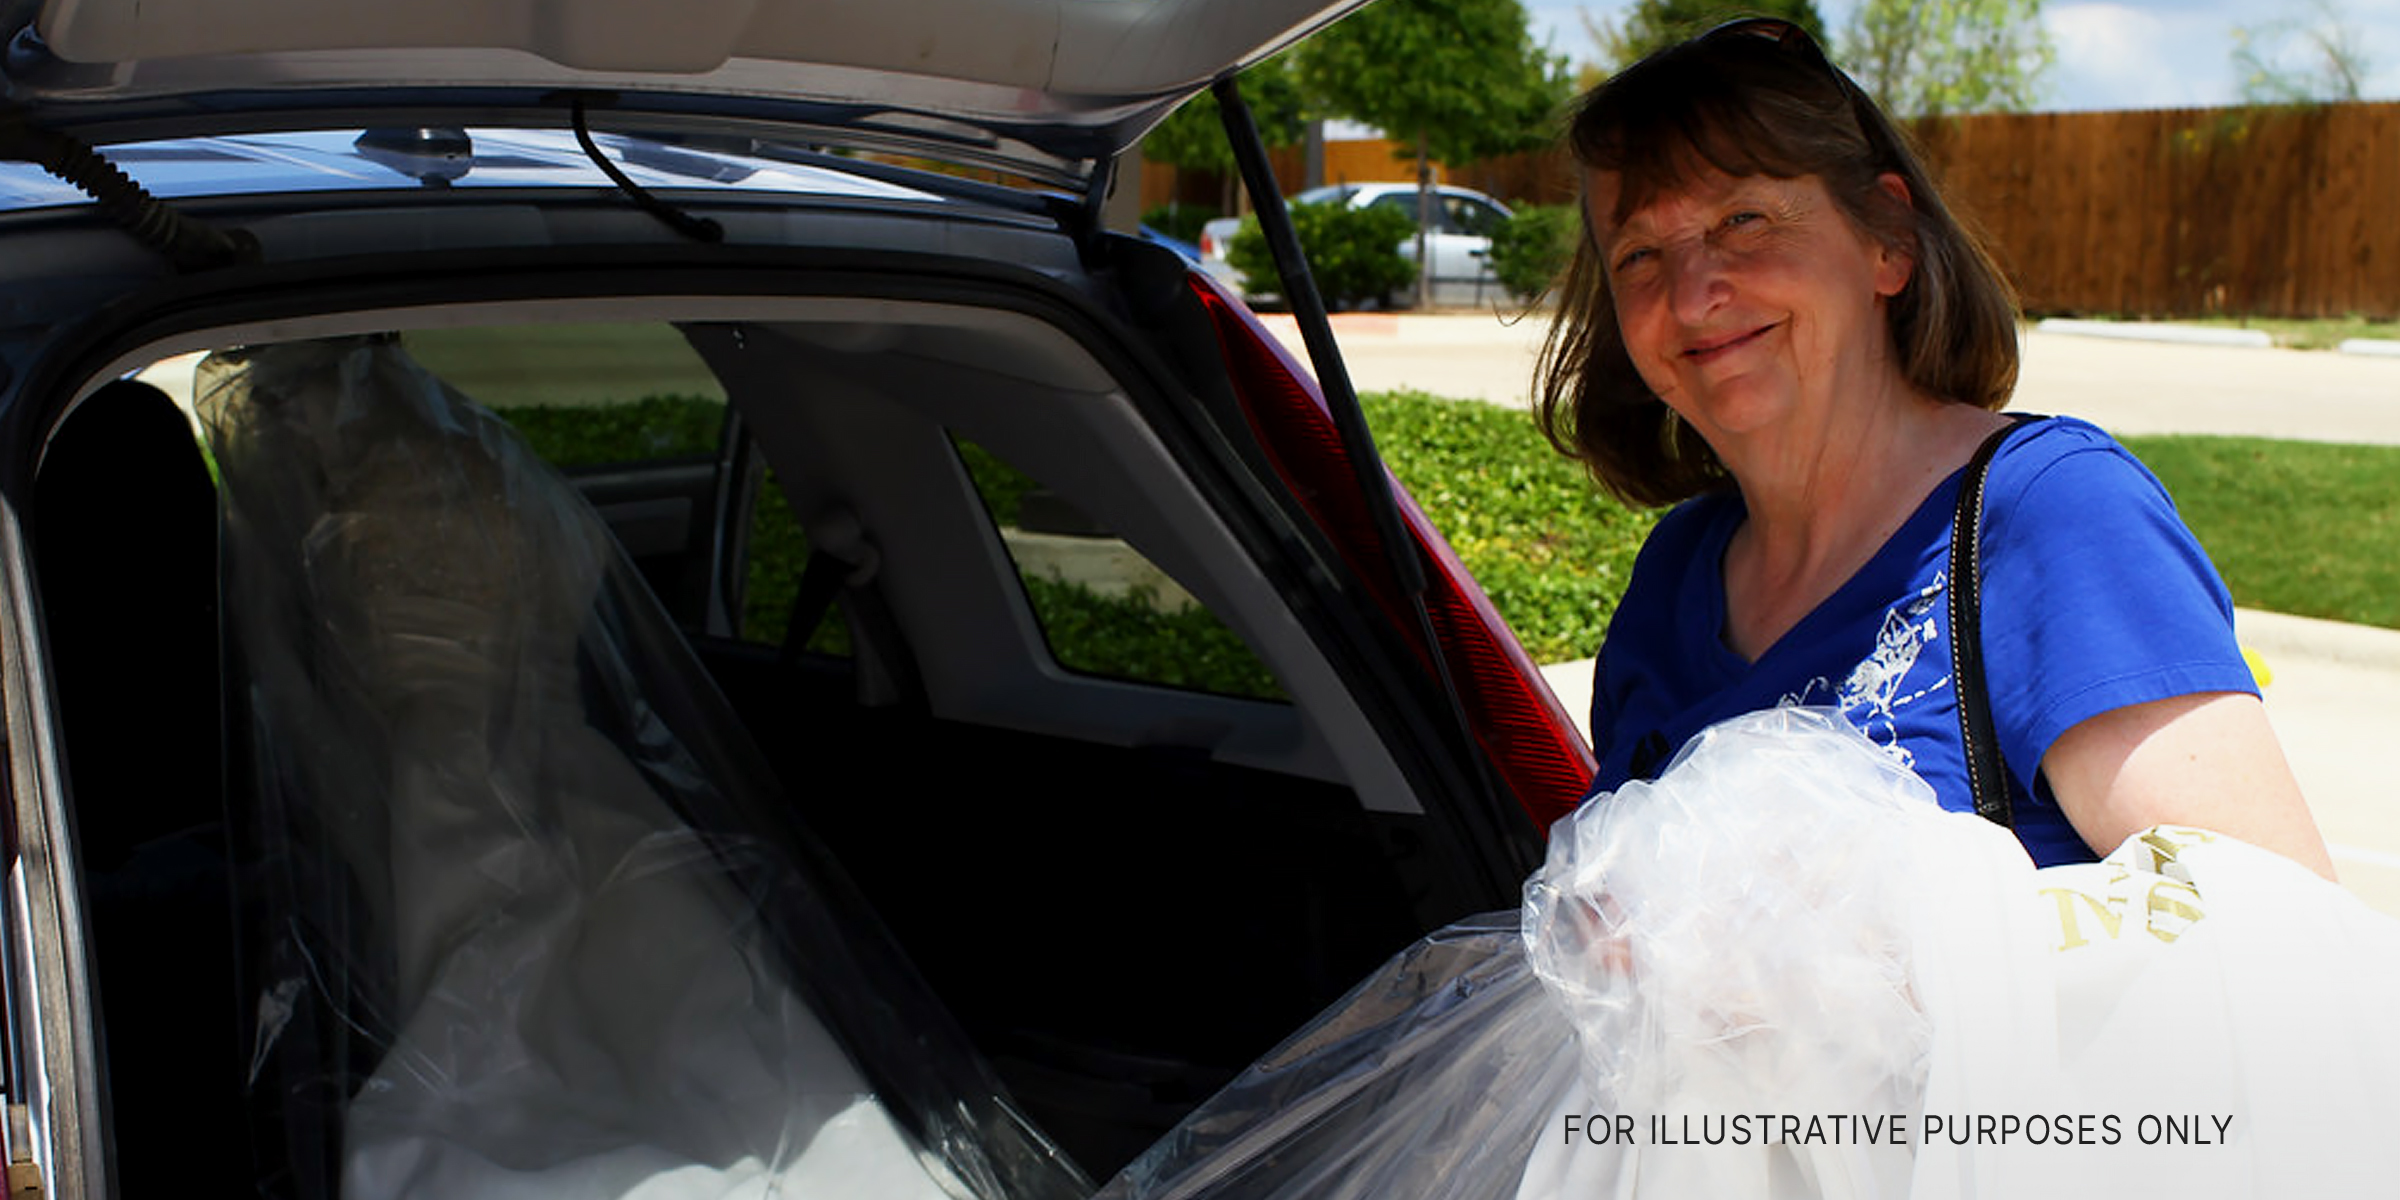 An elderly woman taking out a bridal dress from her car's trunk | Source: Flickr/waitscm/CC BY 2.0